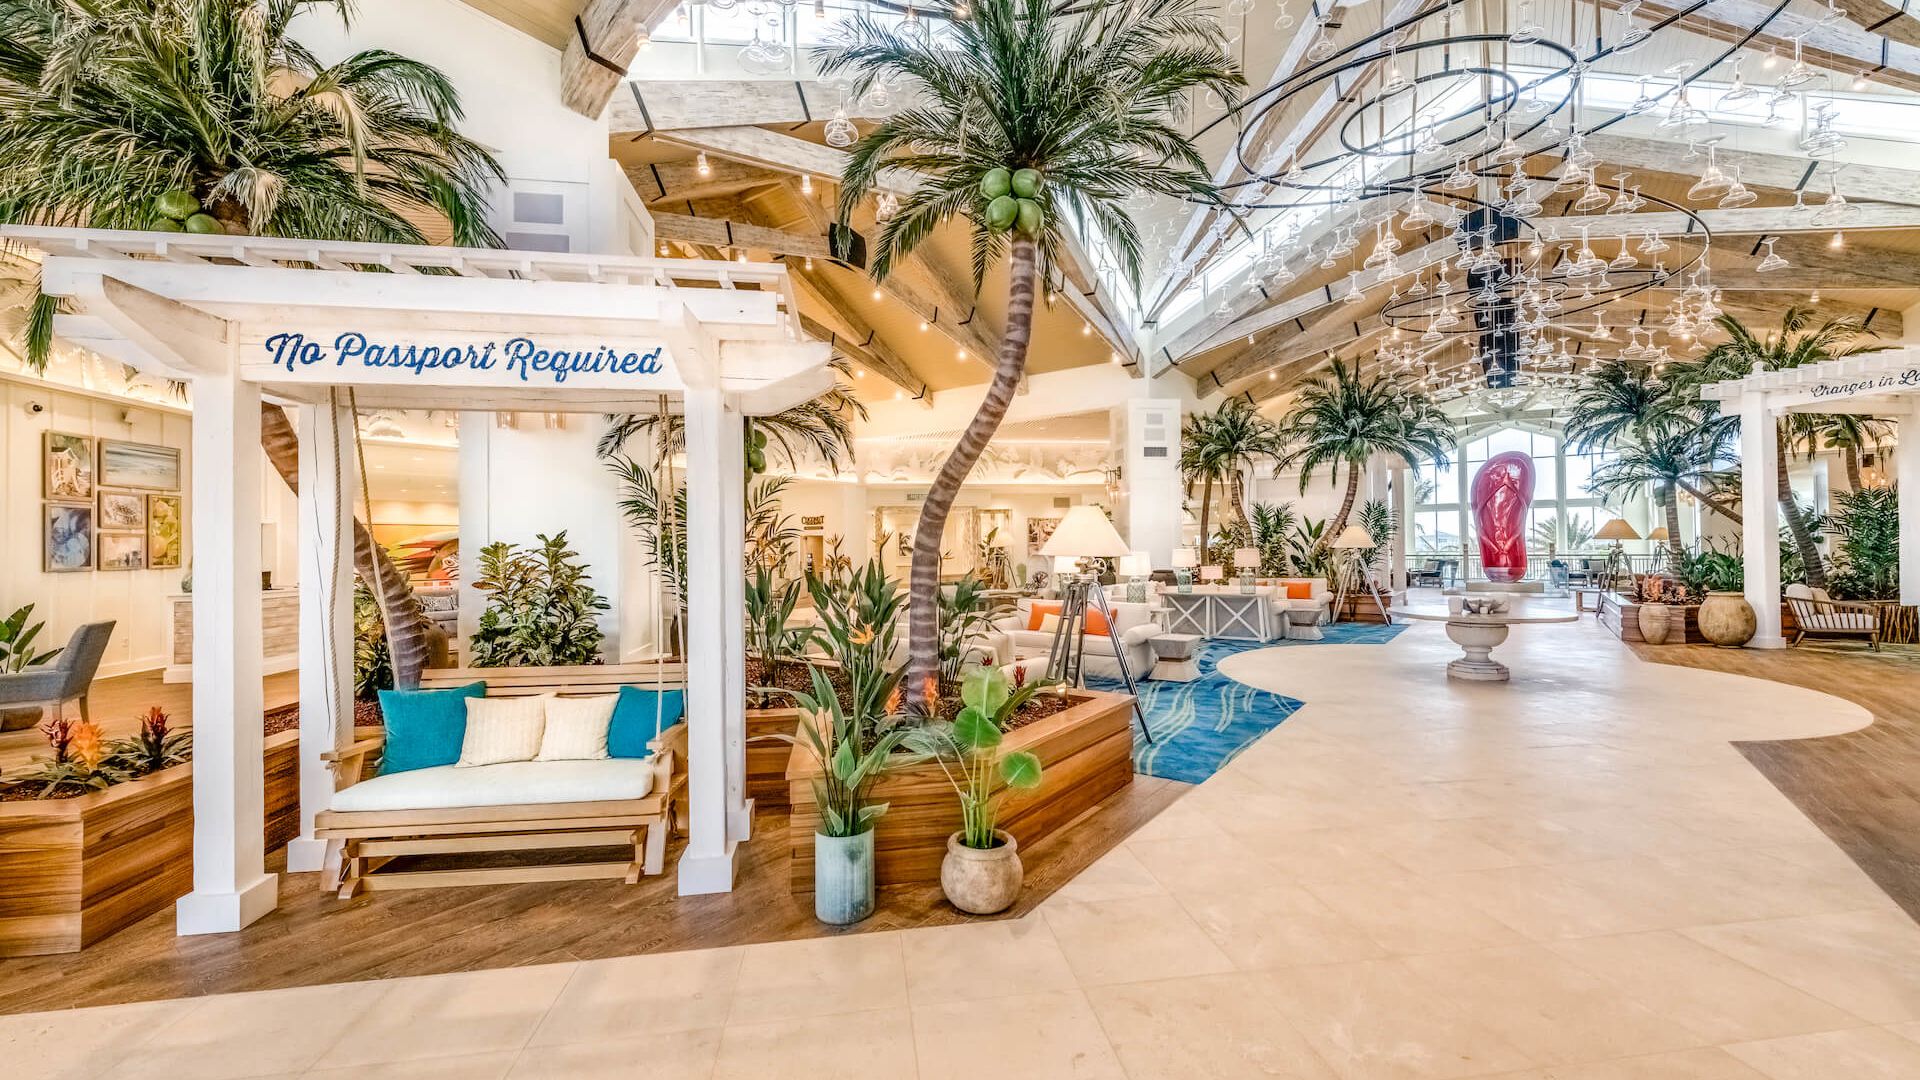 The Margaritaville Resort Orlando hotel lobby, featuring a sign that reads 'No Passport Required.'